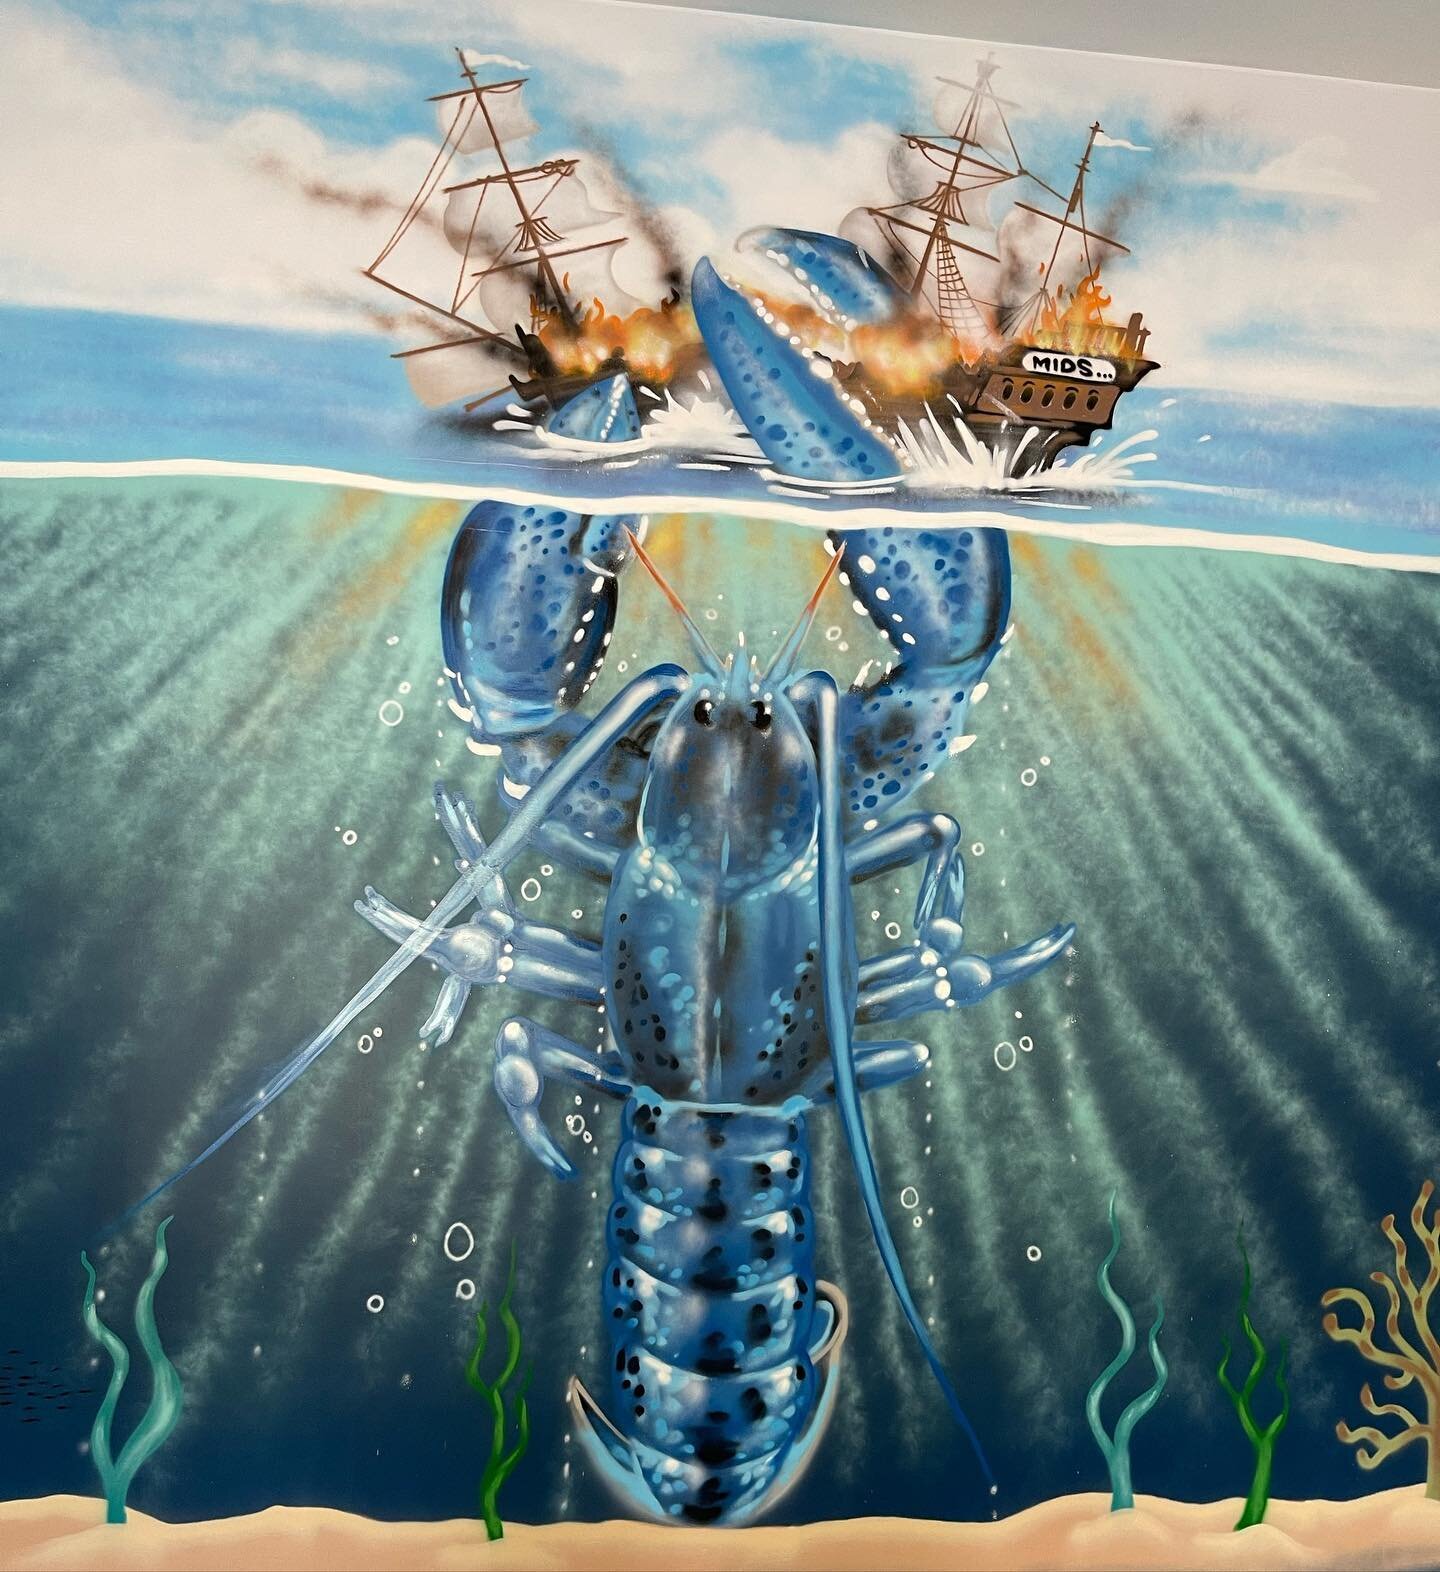 One of the craziest murals I have ever seen and we are lucky to have it in our shop.  We asked Mike for a Moby Dick x Blue Lobster scene and he absolutely crushed it. The ship name is the perfect cherry on top. @mikerichdesigns #bluelobster #art #mur